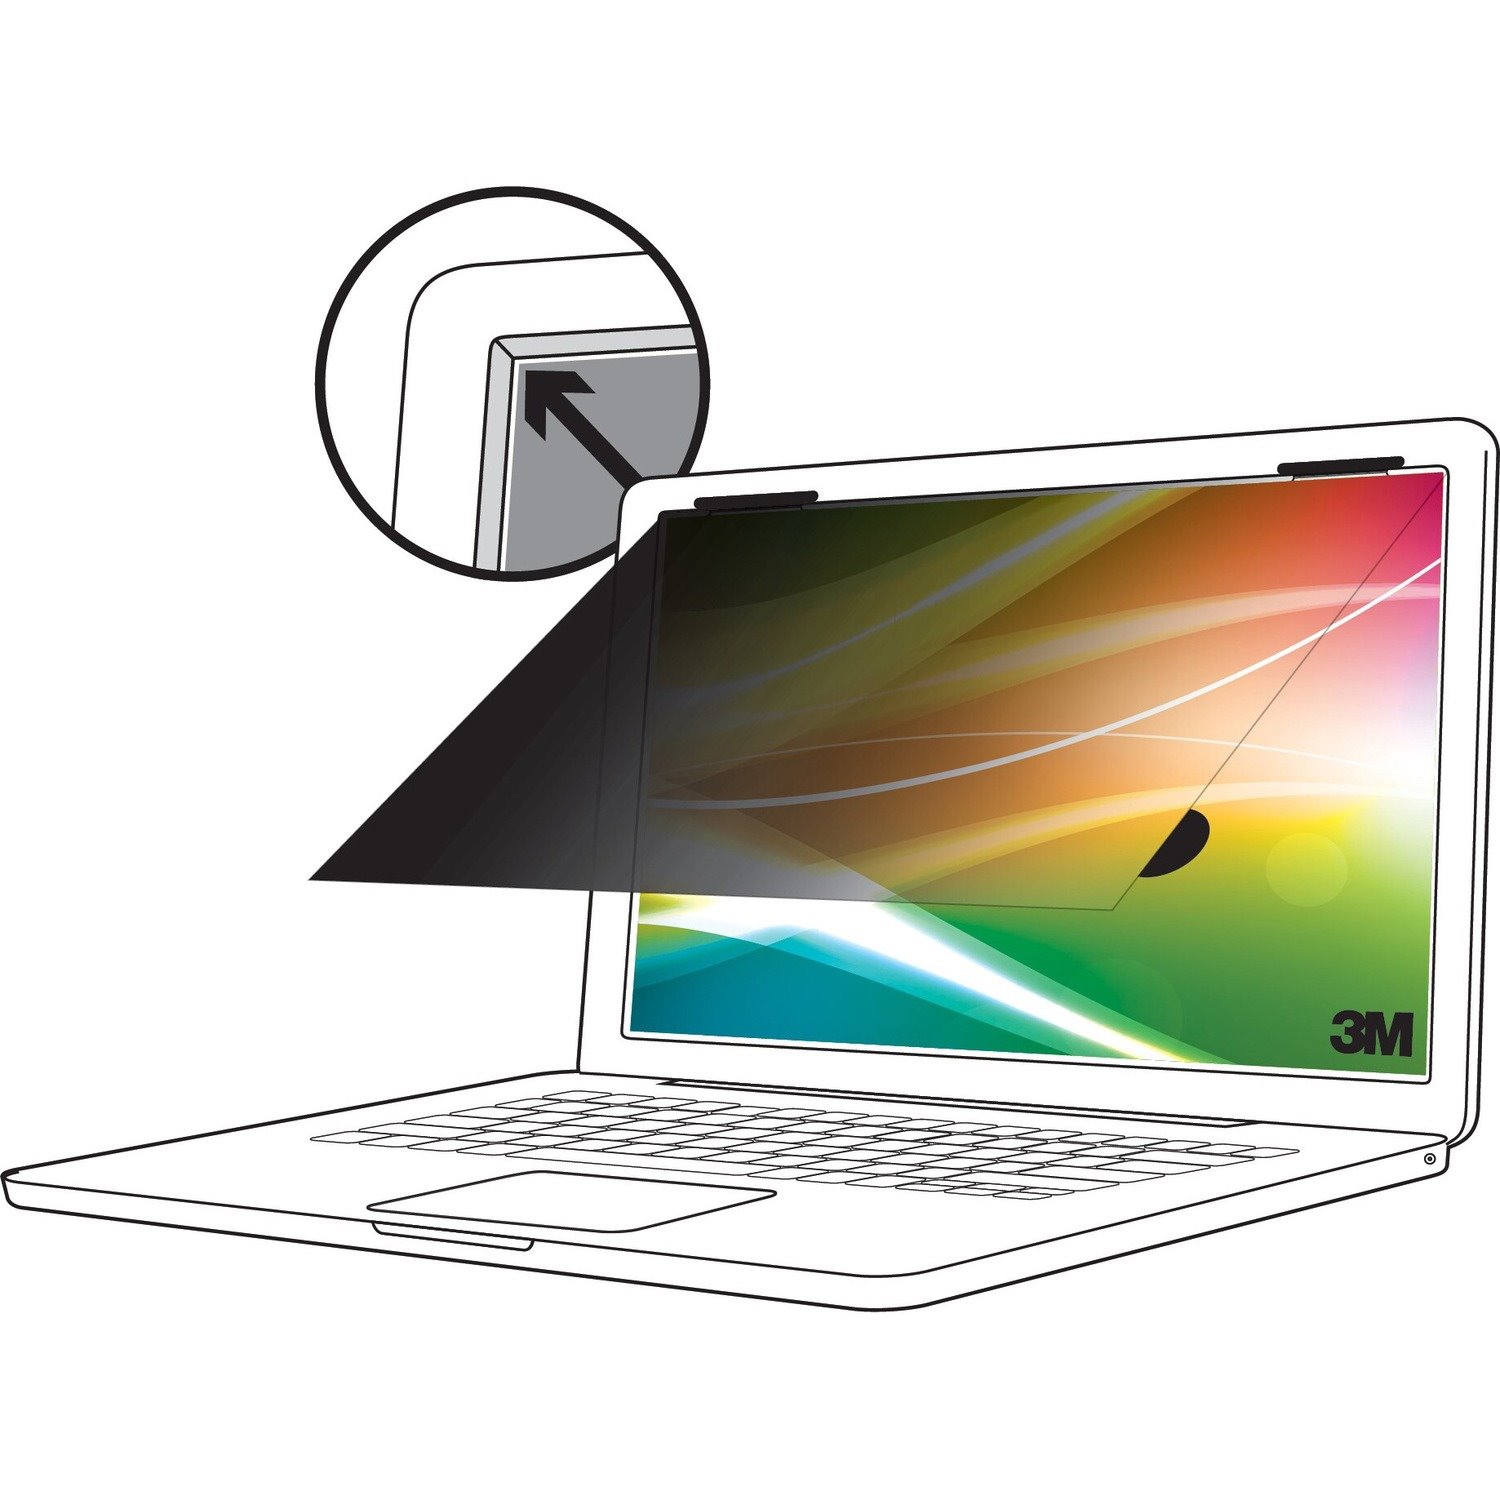 3M&trade; Bright Screen Privacy Filter for 15.6in Laptop, 16:9, BP156W9B